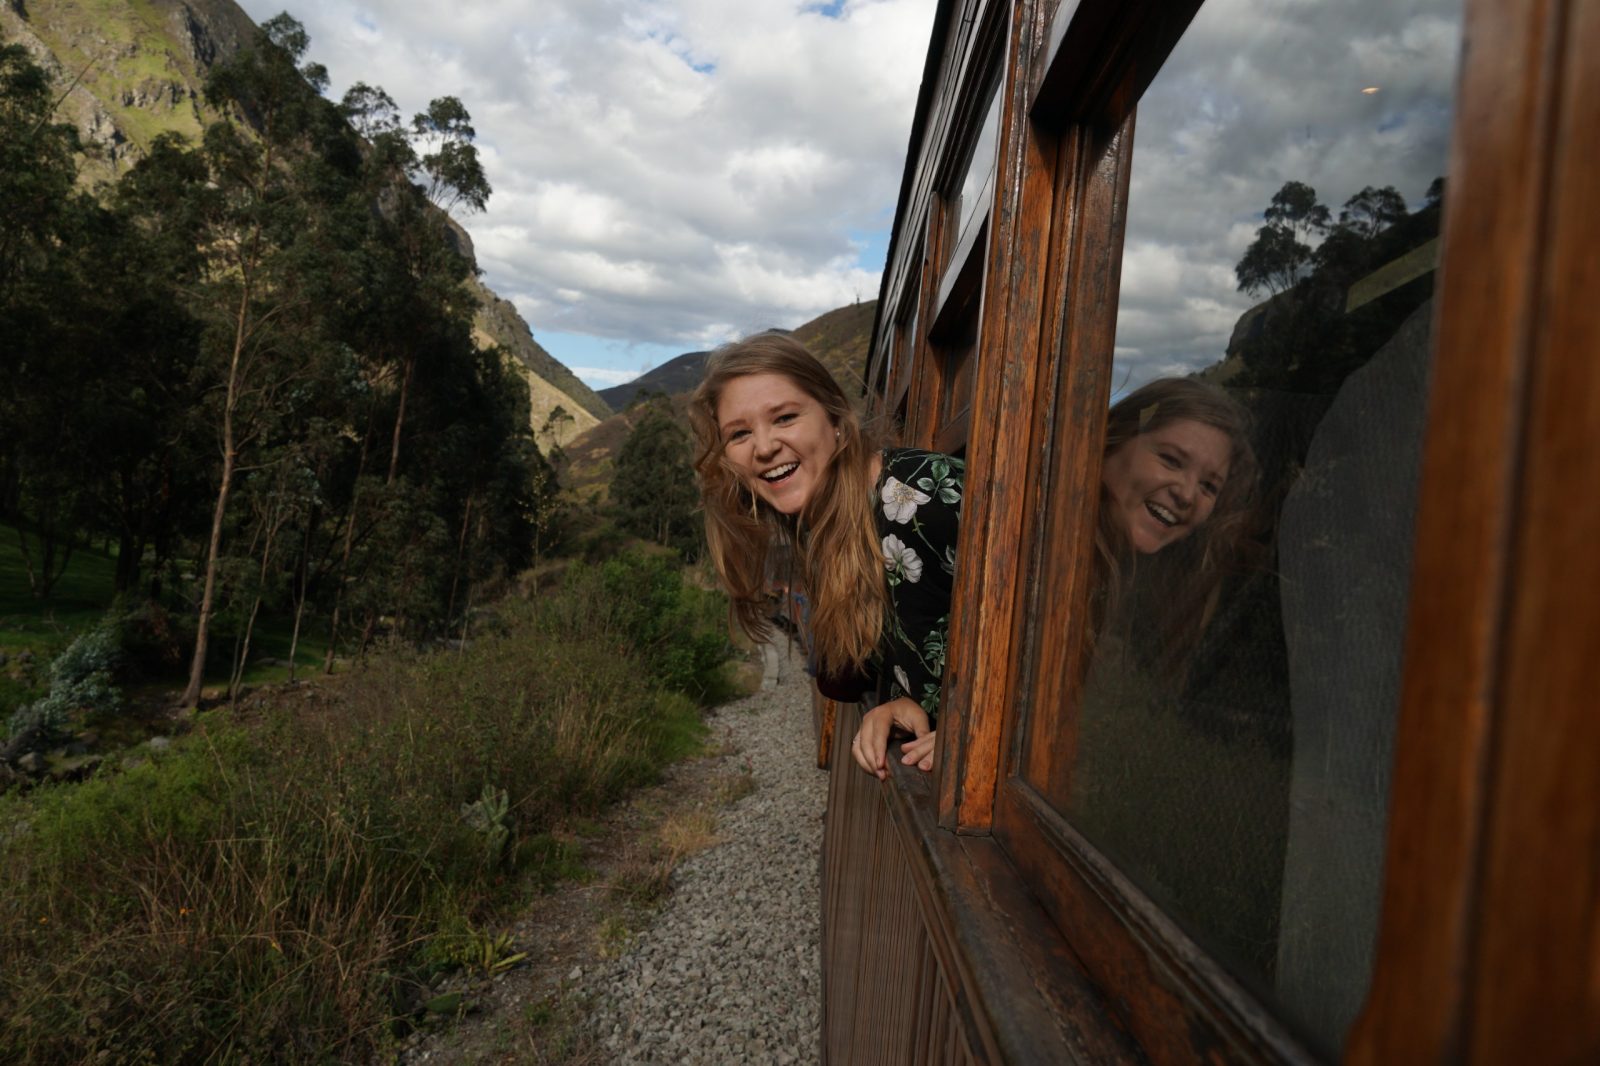 Madi Dynes sticks her head out of a famous train that rounds the Nariz del Diablo in Ecuador.